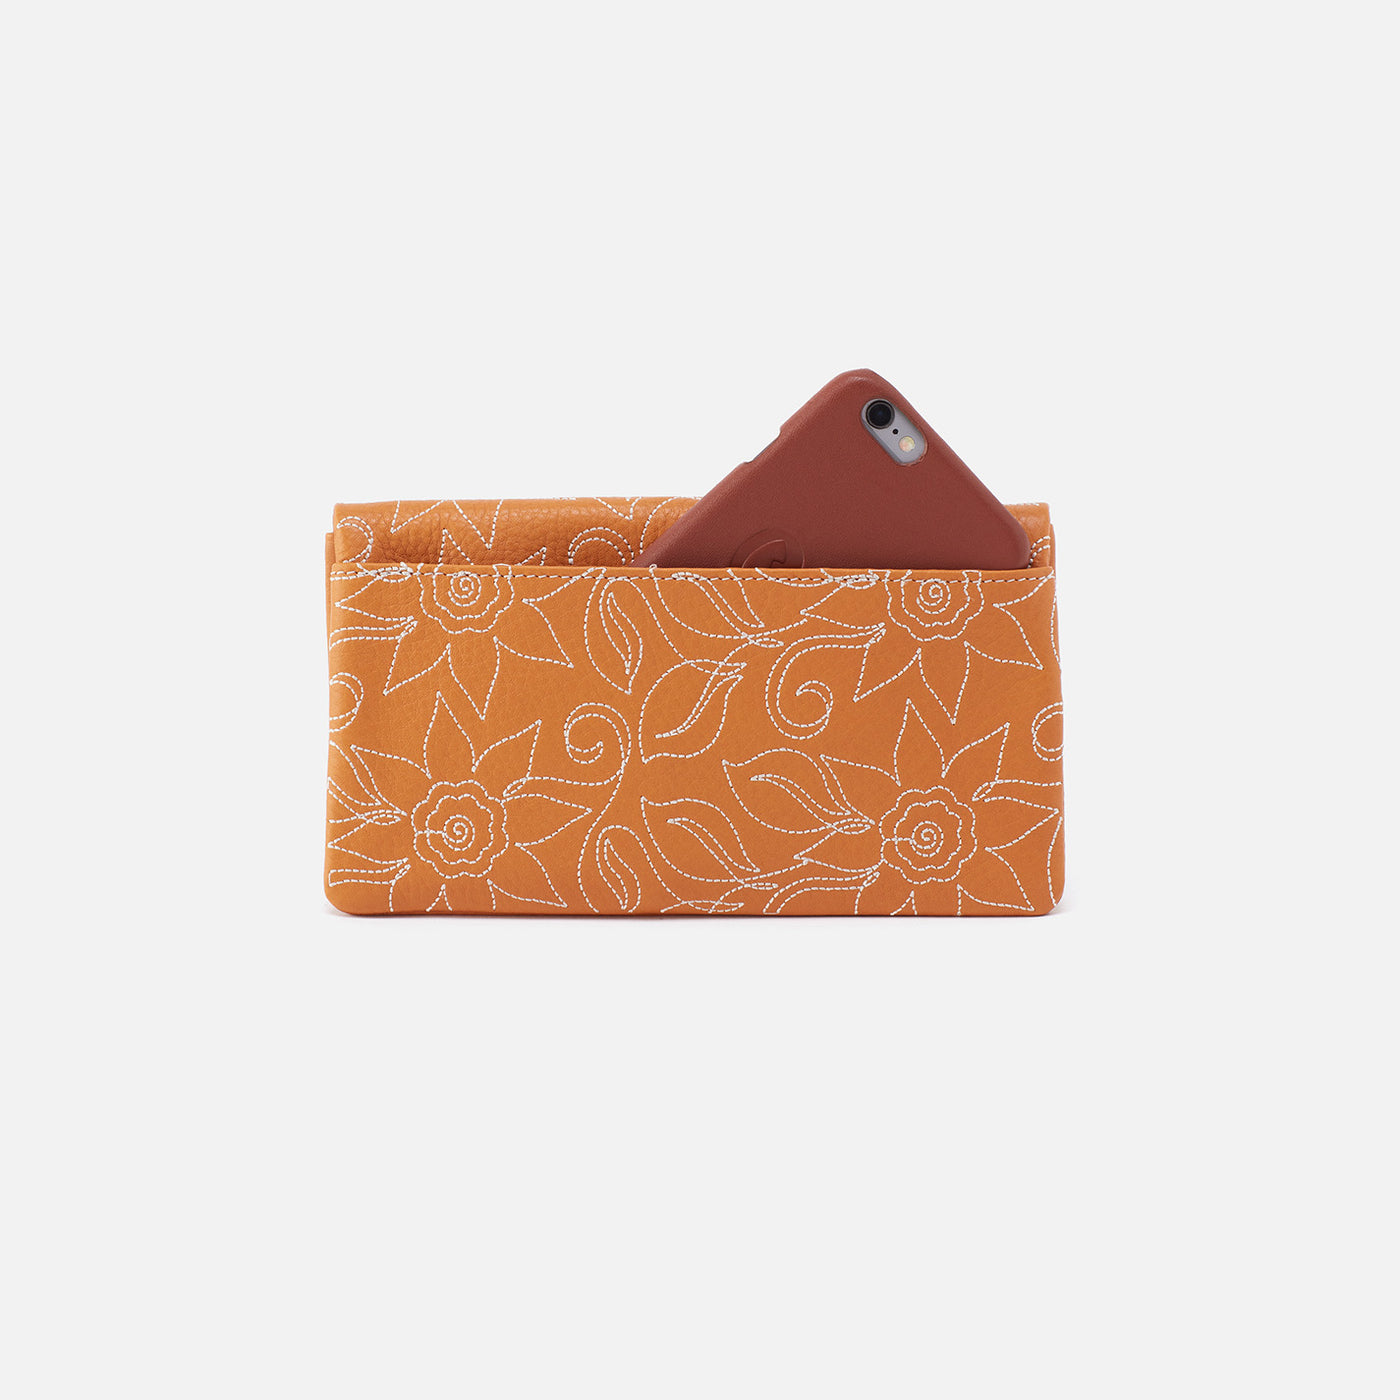 Lumen Embroidered Continental Wallet in Pebbled Leather - Sundial